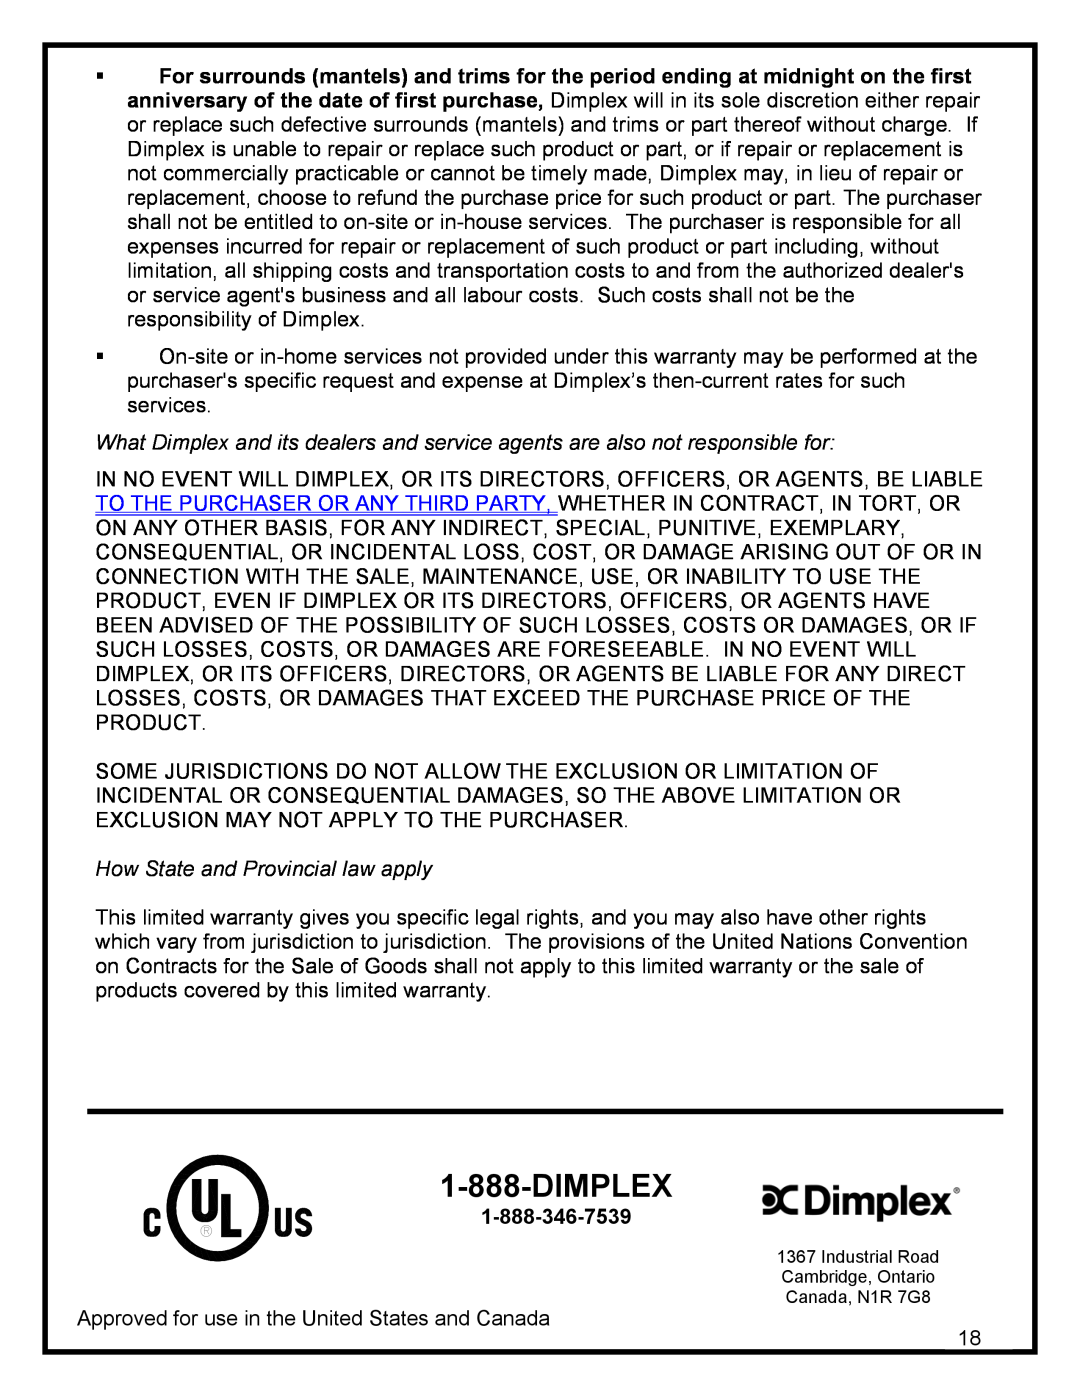 Dimplex DF3215 manual Dimplex, How State and Provincial law apply 